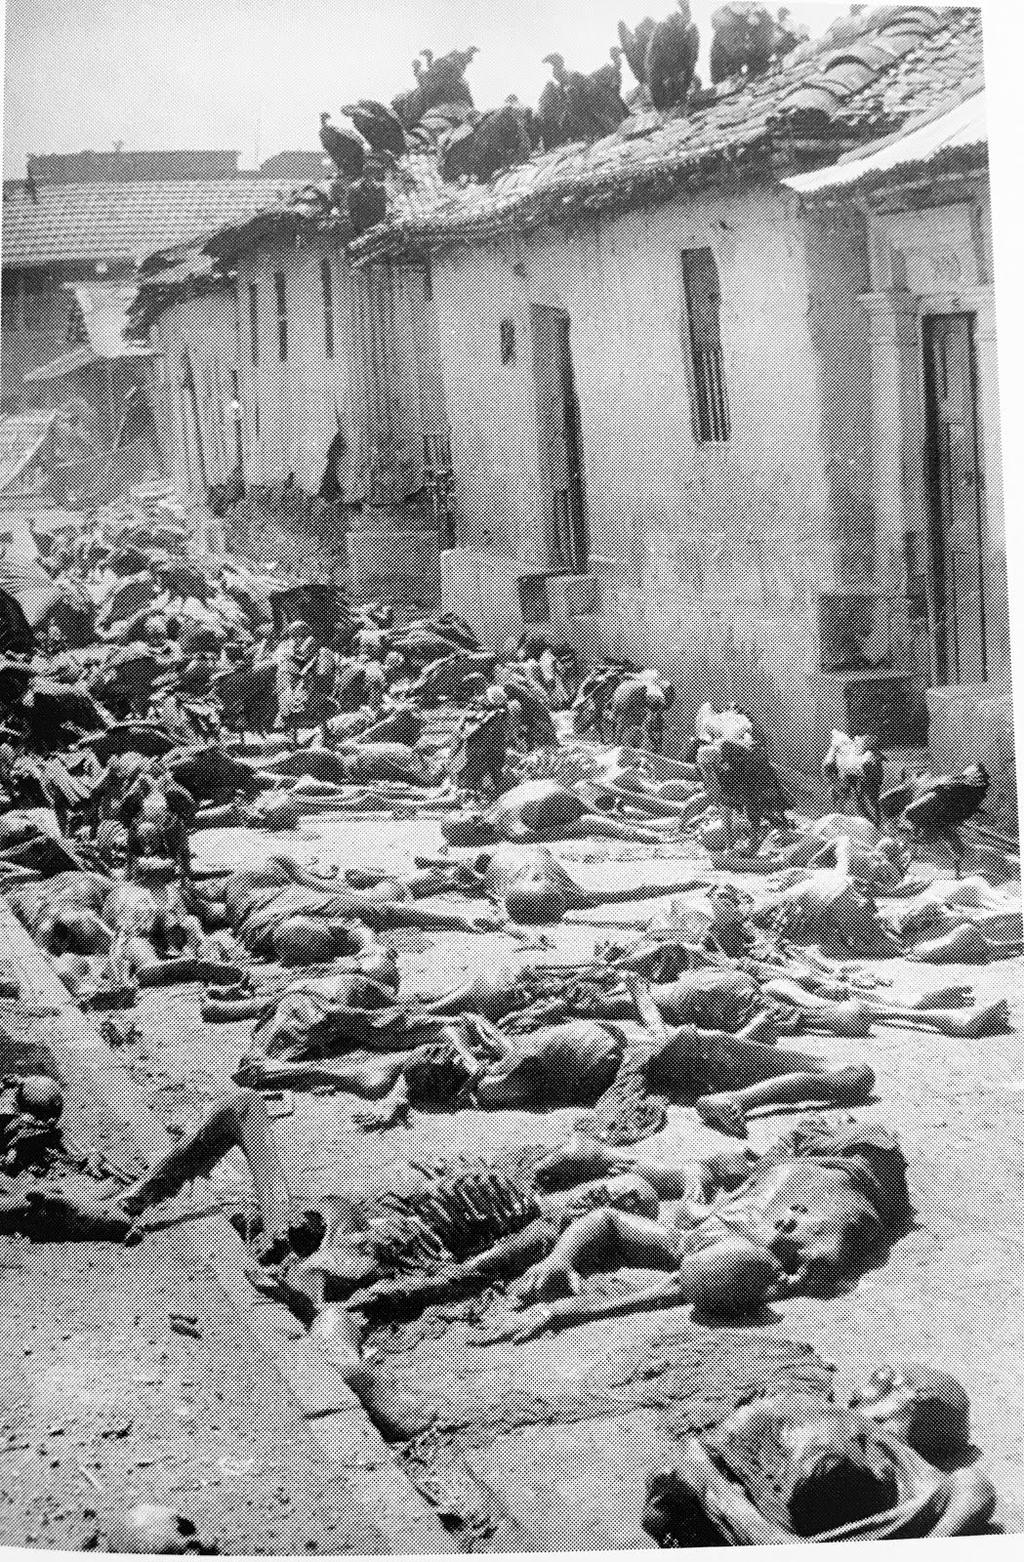 Appendix V This image depicts the dead bodies left lying on the streets of Calcutta during the four-day riots in August of 1946 and left 5,000 dead.